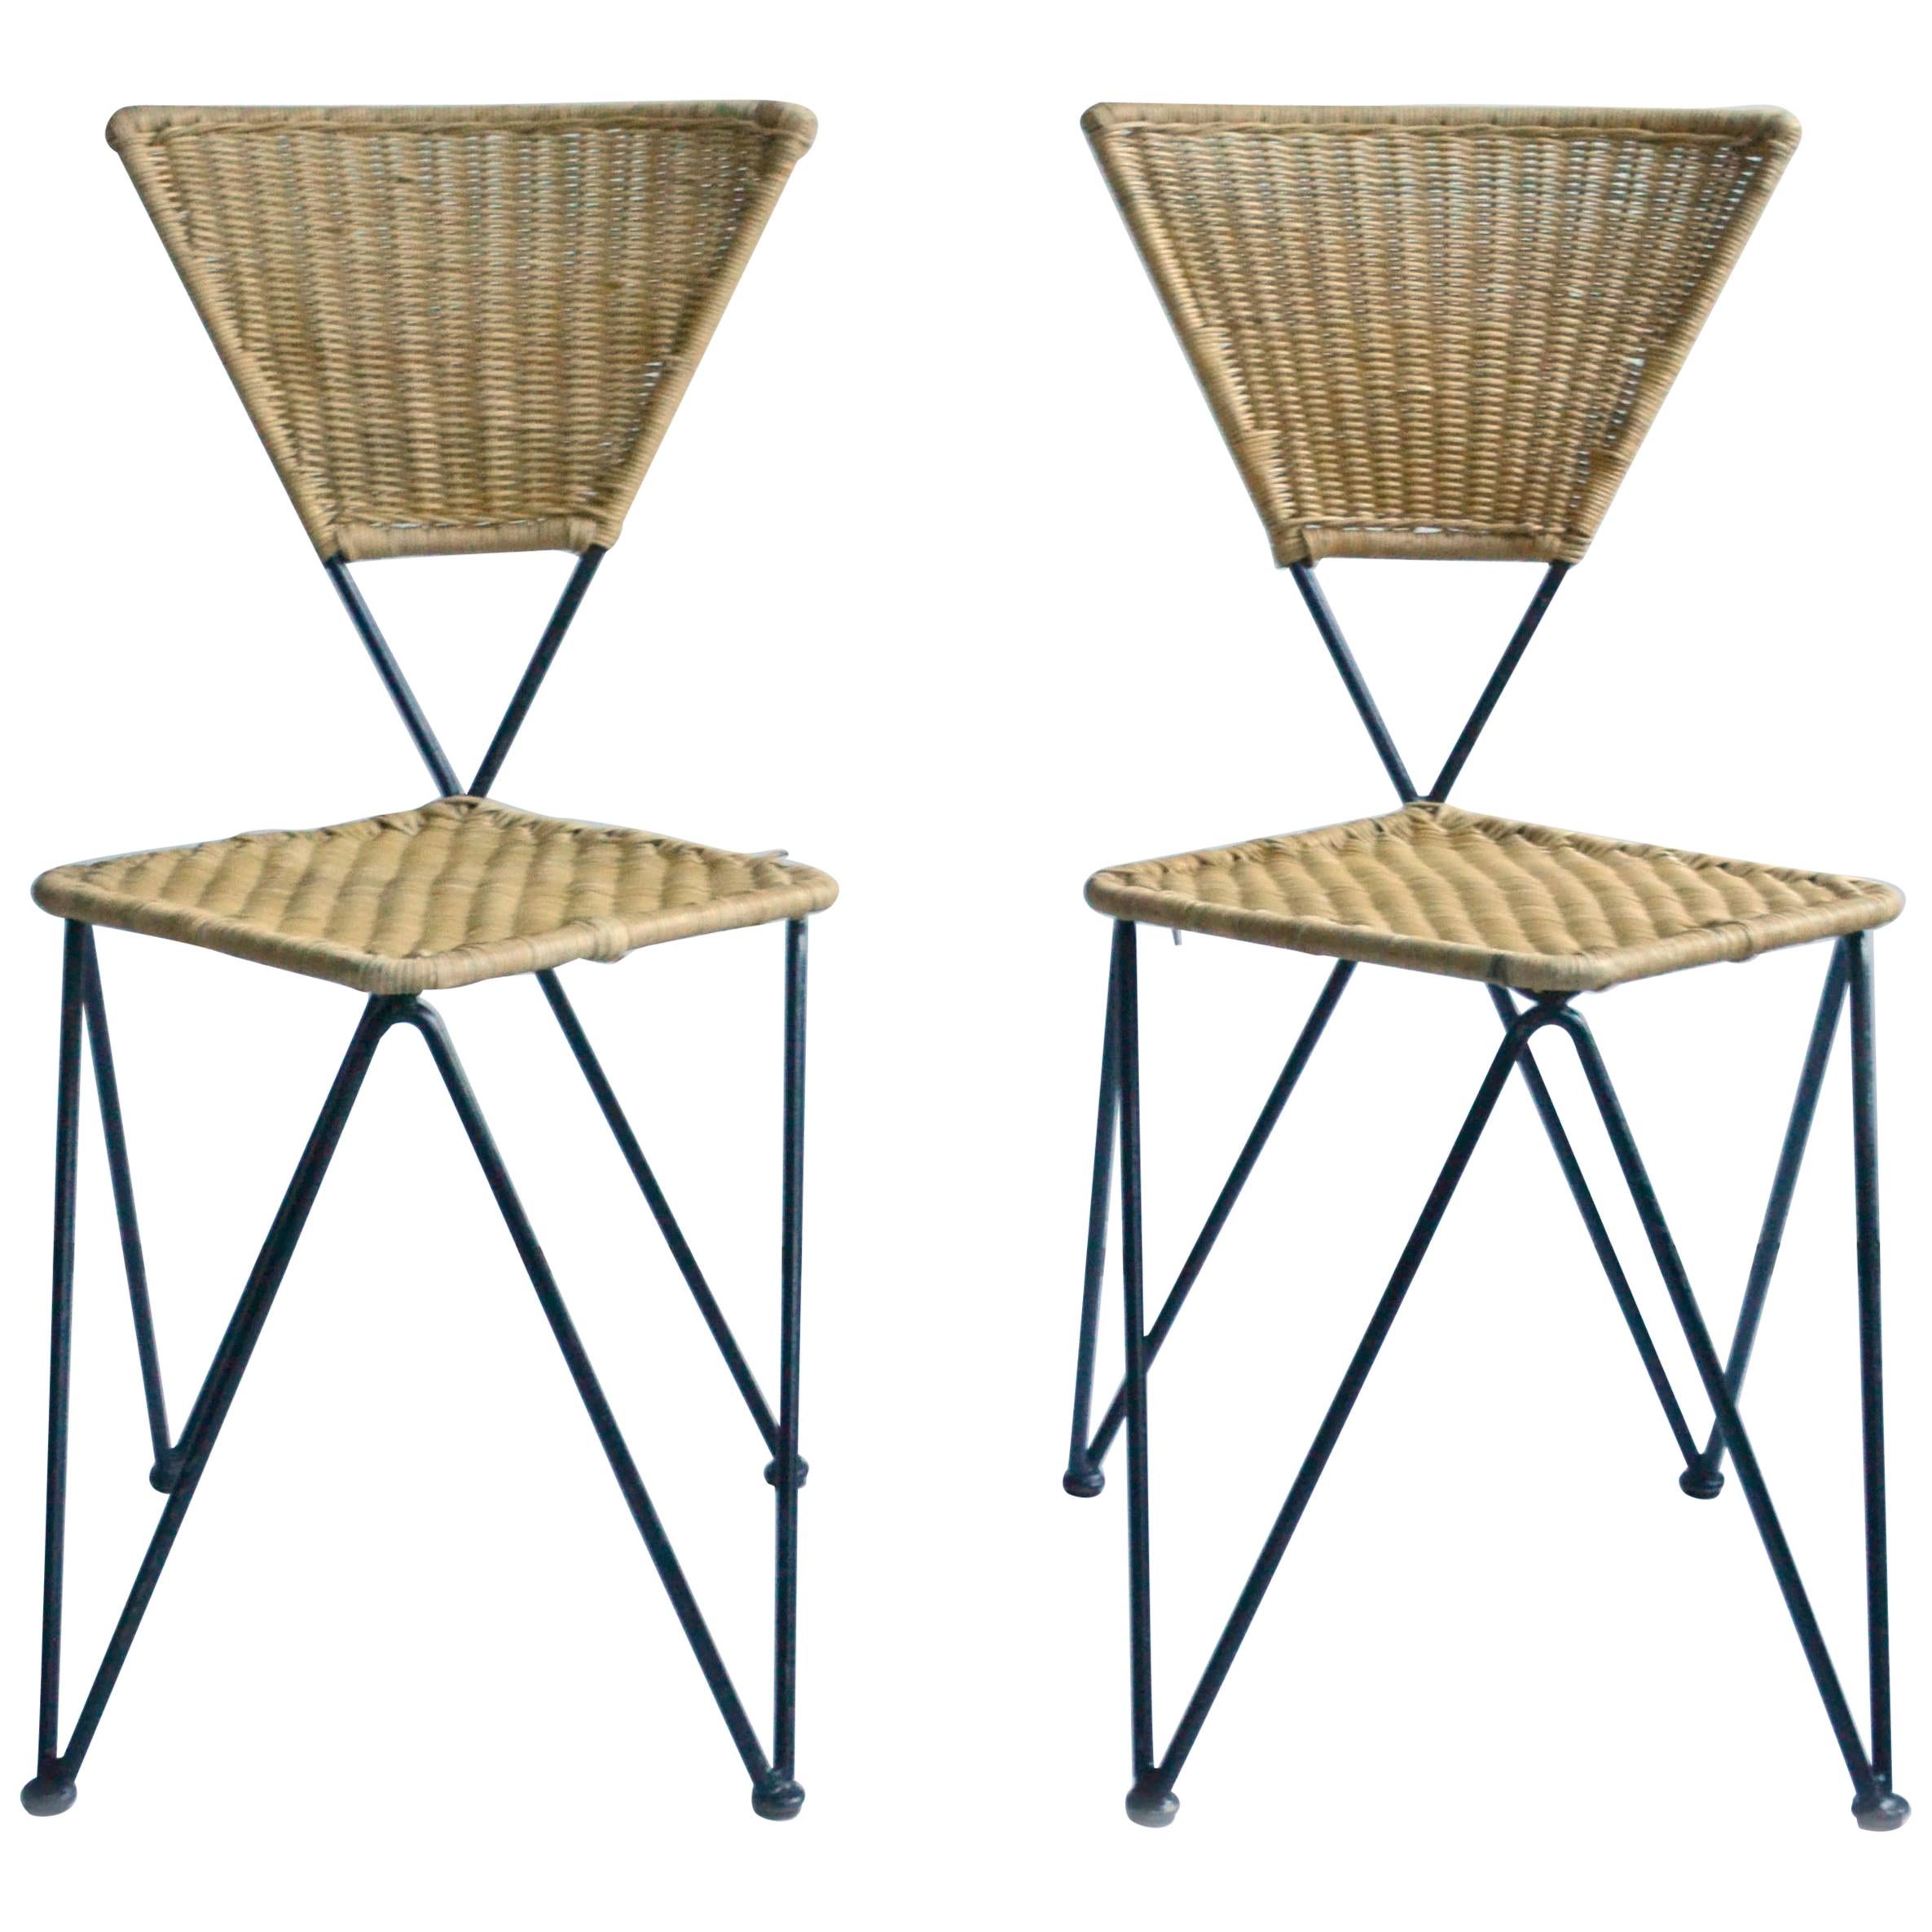 Pair of Wicker and Metal Dining Chairs, Vienna, 1950